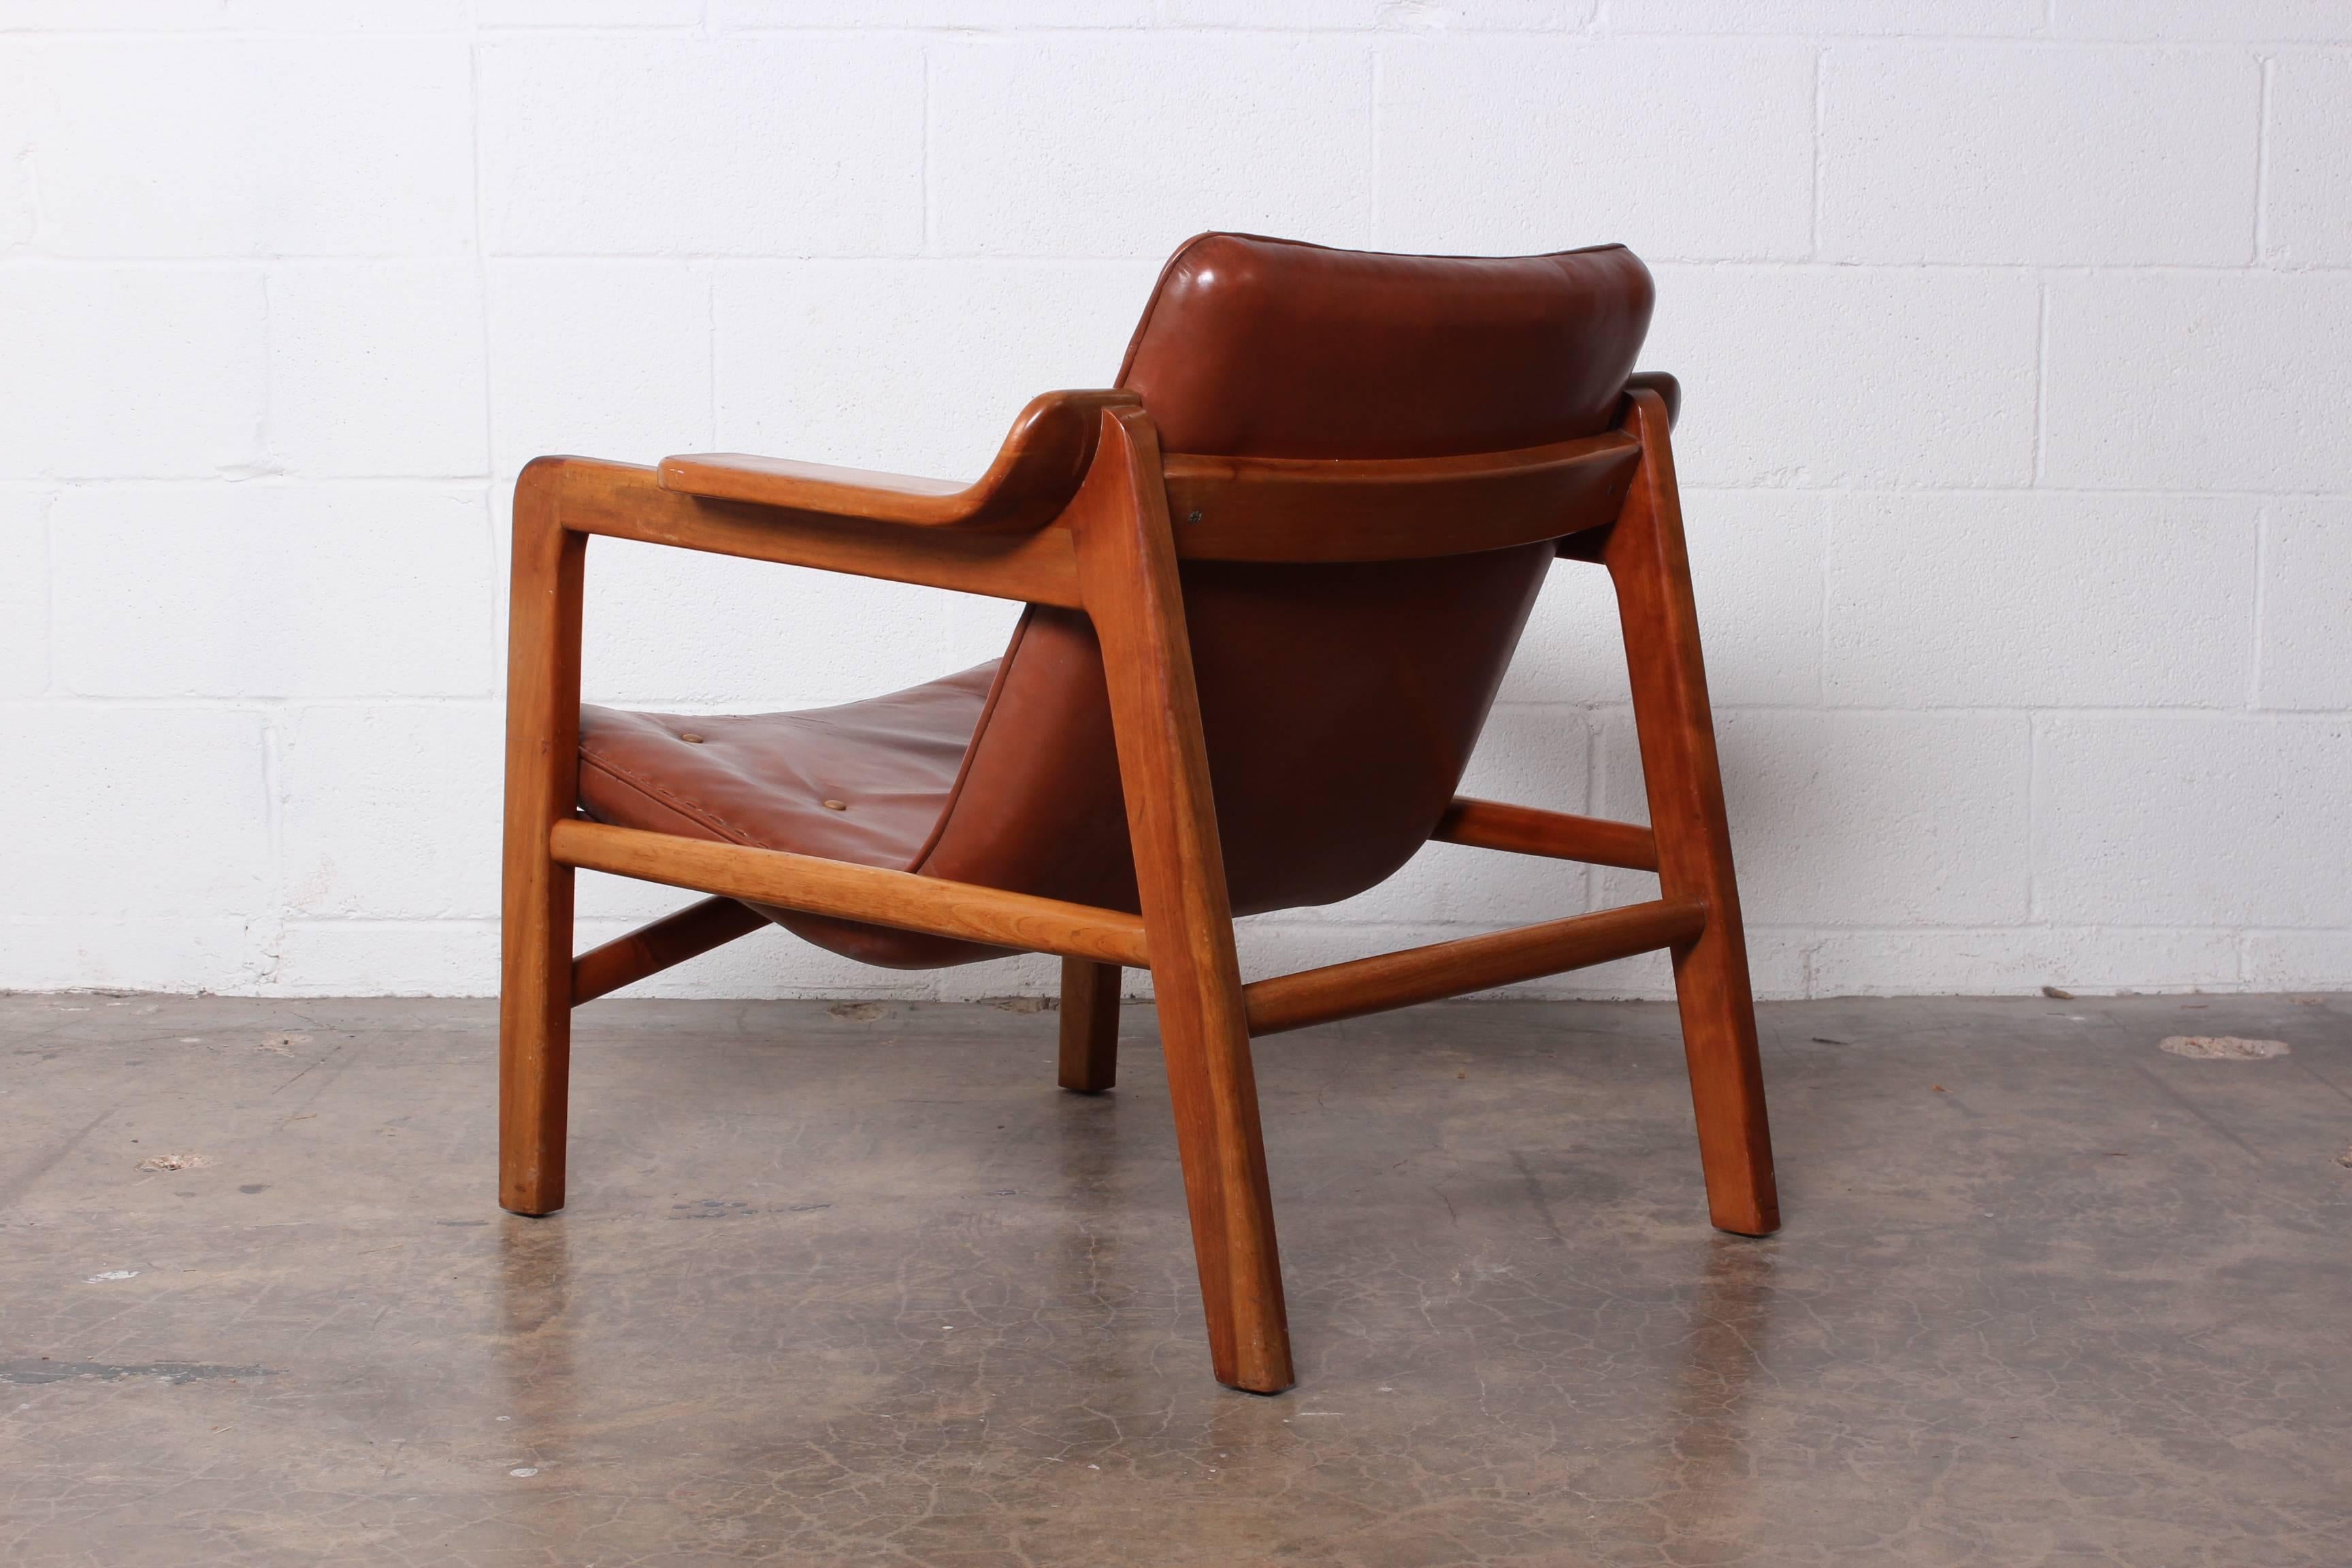 Tove & Edvard Kindt-Larsen 'Fireplace' Lounge Chair in Original Leather 3